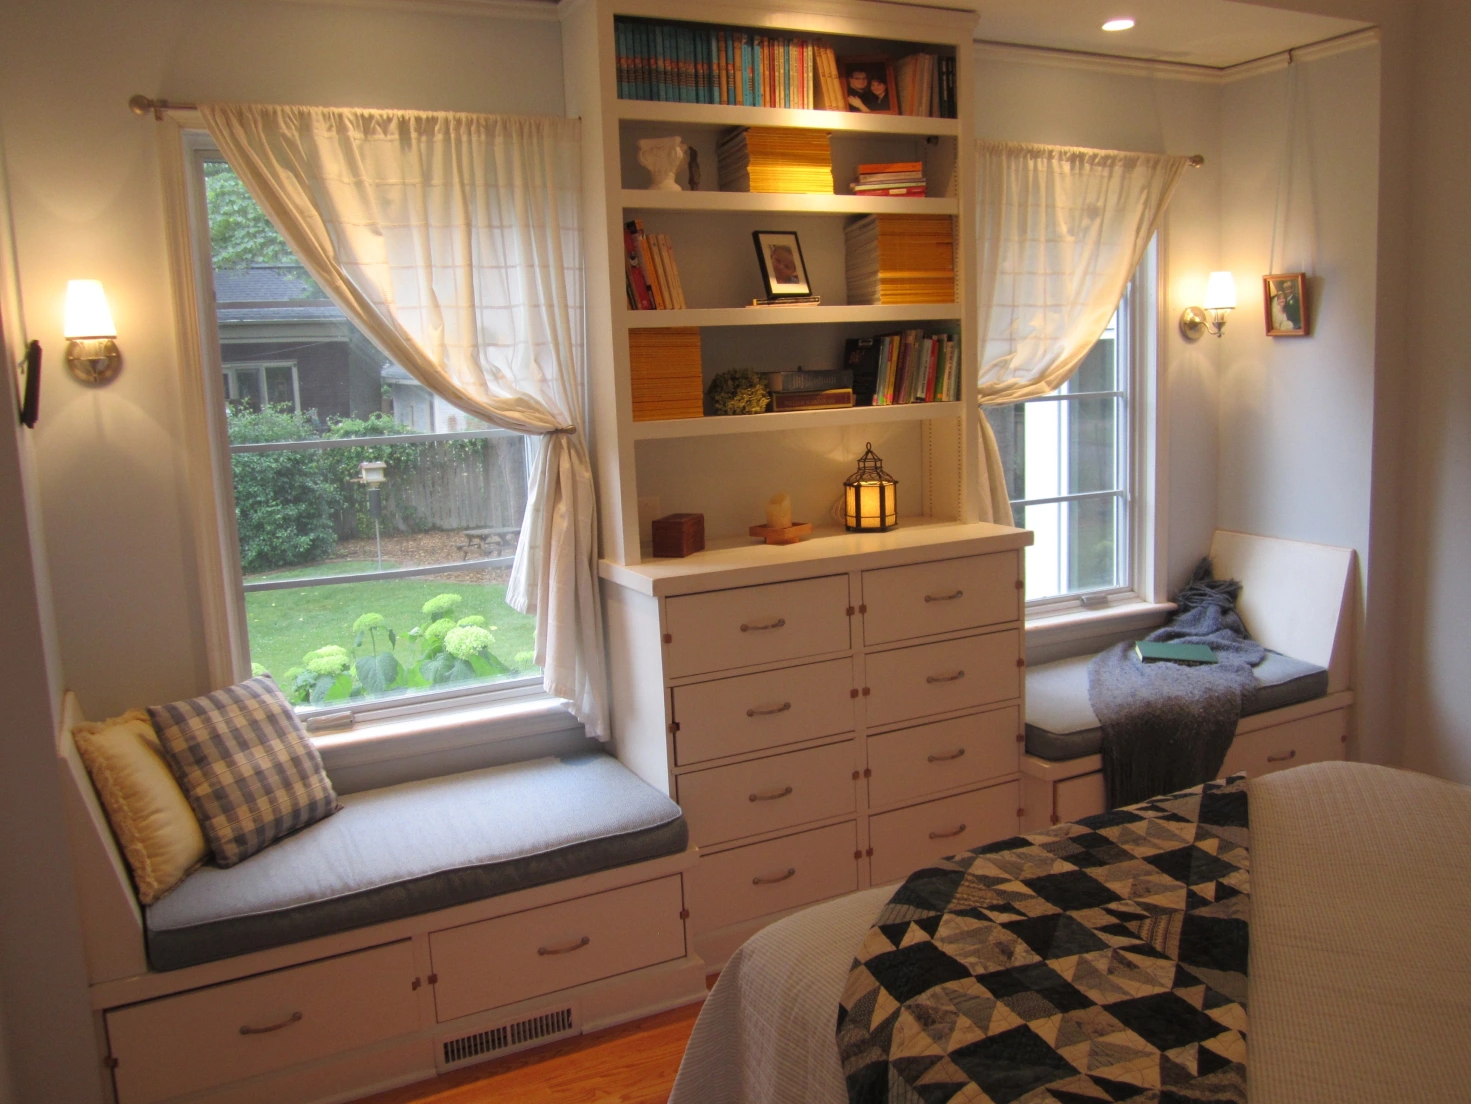 A bedroom with the bed off to the left, the right shows two windows framed with built in drawers and shelves and window seats